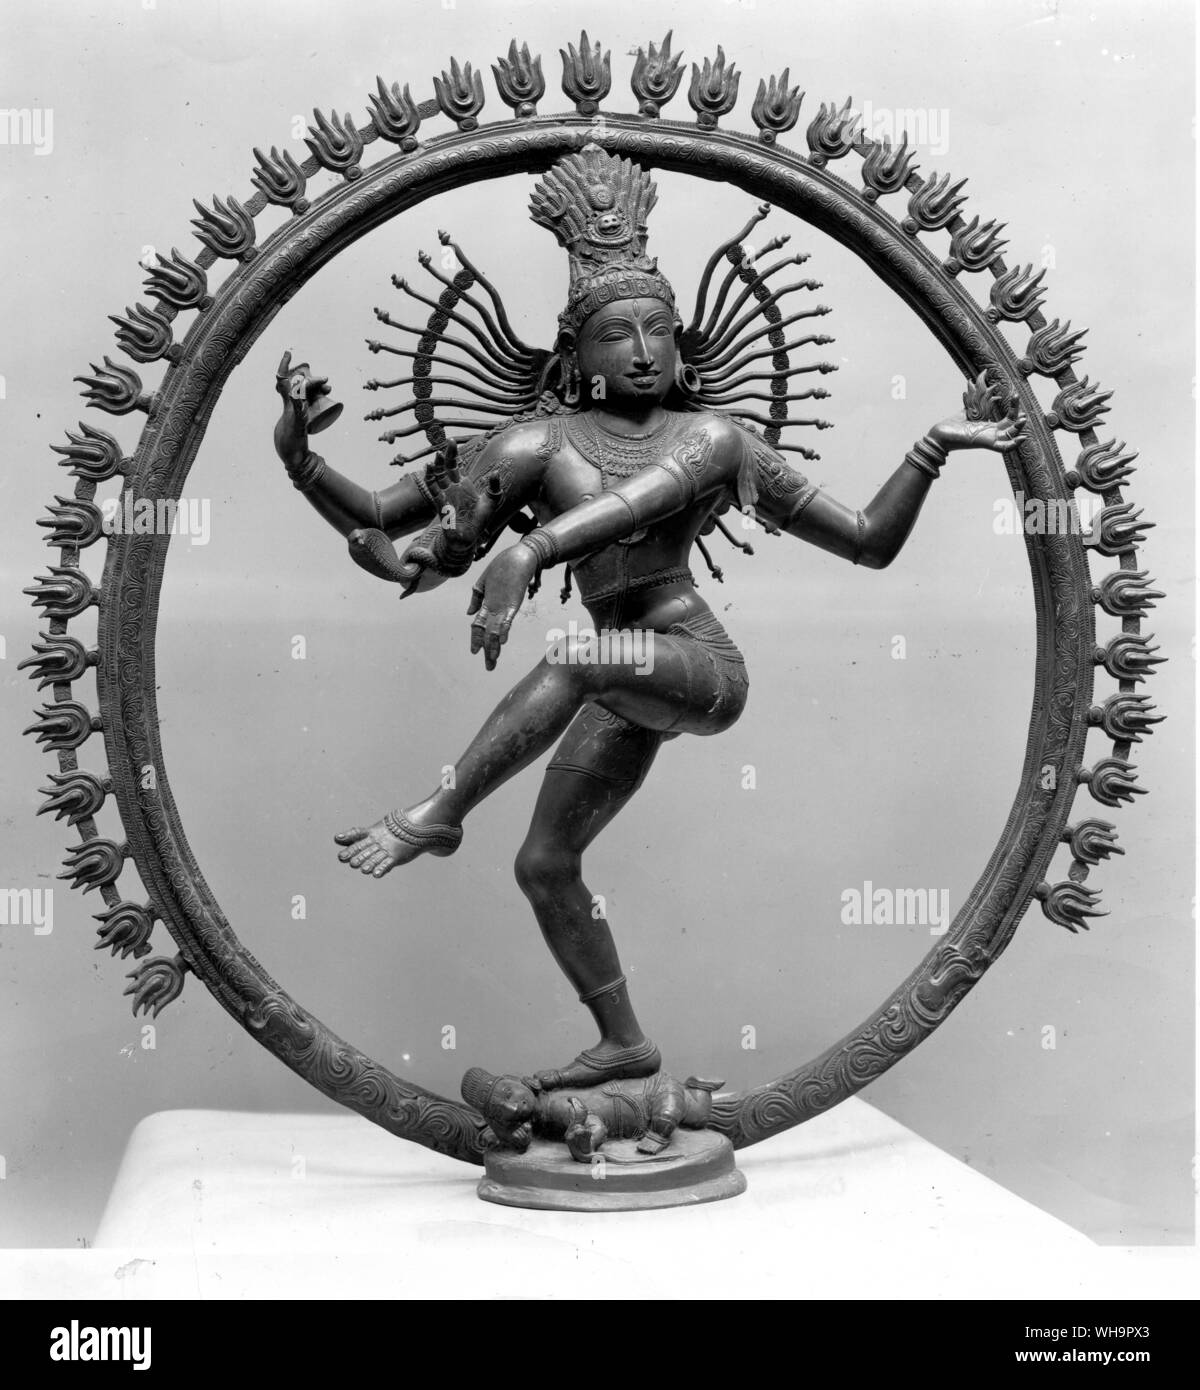 The Indian god Shiva, the Destroyer, performing the dance of death Stock Photo